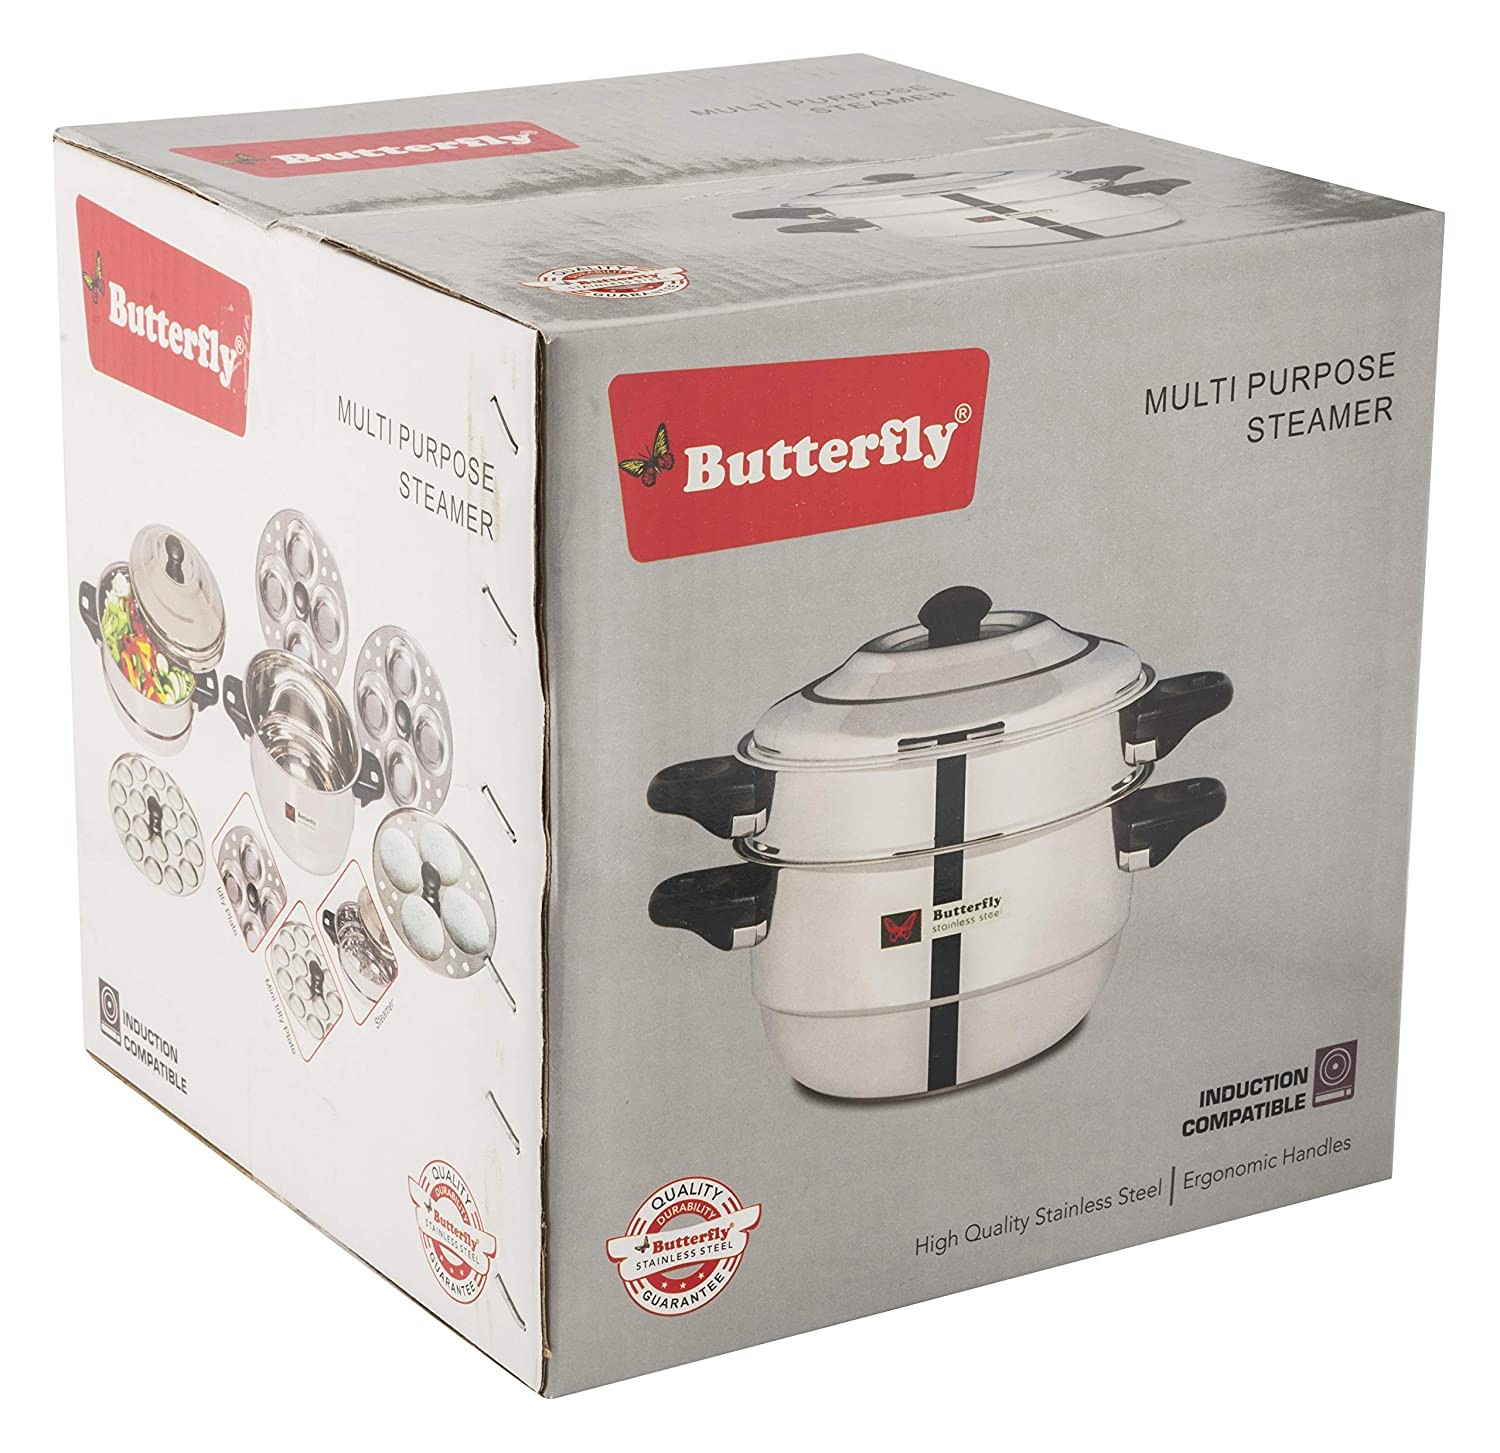 butterfly-stainless-steel-multi-idli-cooker-steamer-with-firm-bottom-all-in-one-big-size-dhokla-cooker-3-plate-idli-dhokla-1-baby-idli-momo-steamer-3-in-1-idli-maker6